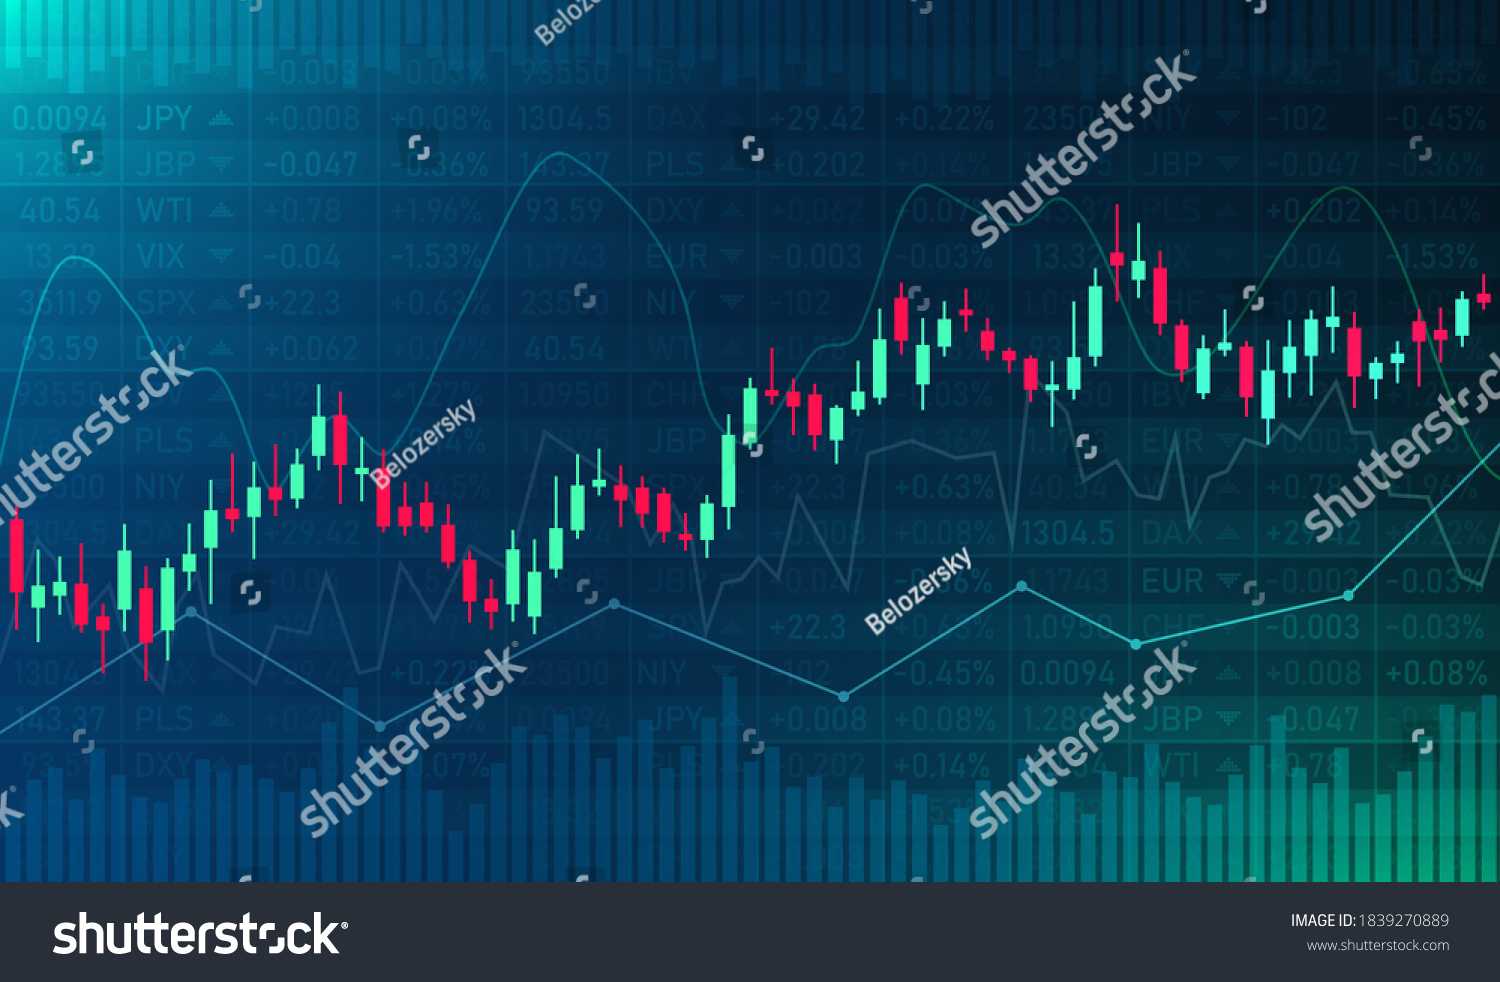 SVG of Stock exchange vector background. Stock market candlestick chart. Buy and sell indicators for trade on the chart. Financial diagram with assets values moving up and down. Vector illustration. svg